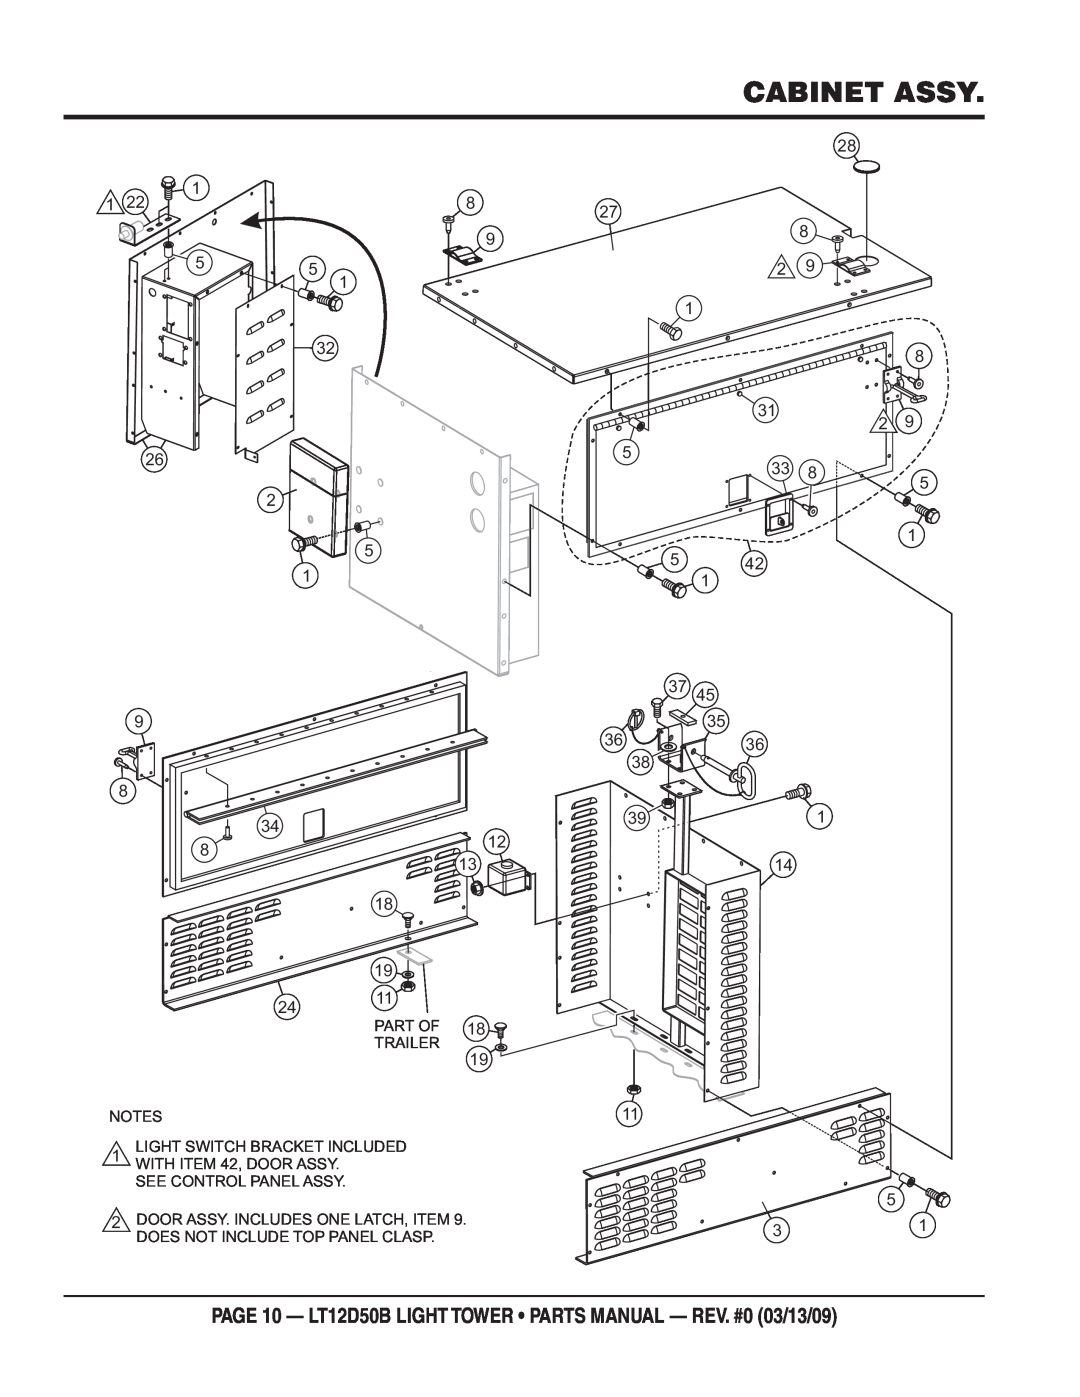 Multiquip manual Cabinet Assy, PAGE 10 - LT12D50B LIGHT TOWER PARTS MANUAL - REV. #0 03/13/09, Part Of, Trailer 